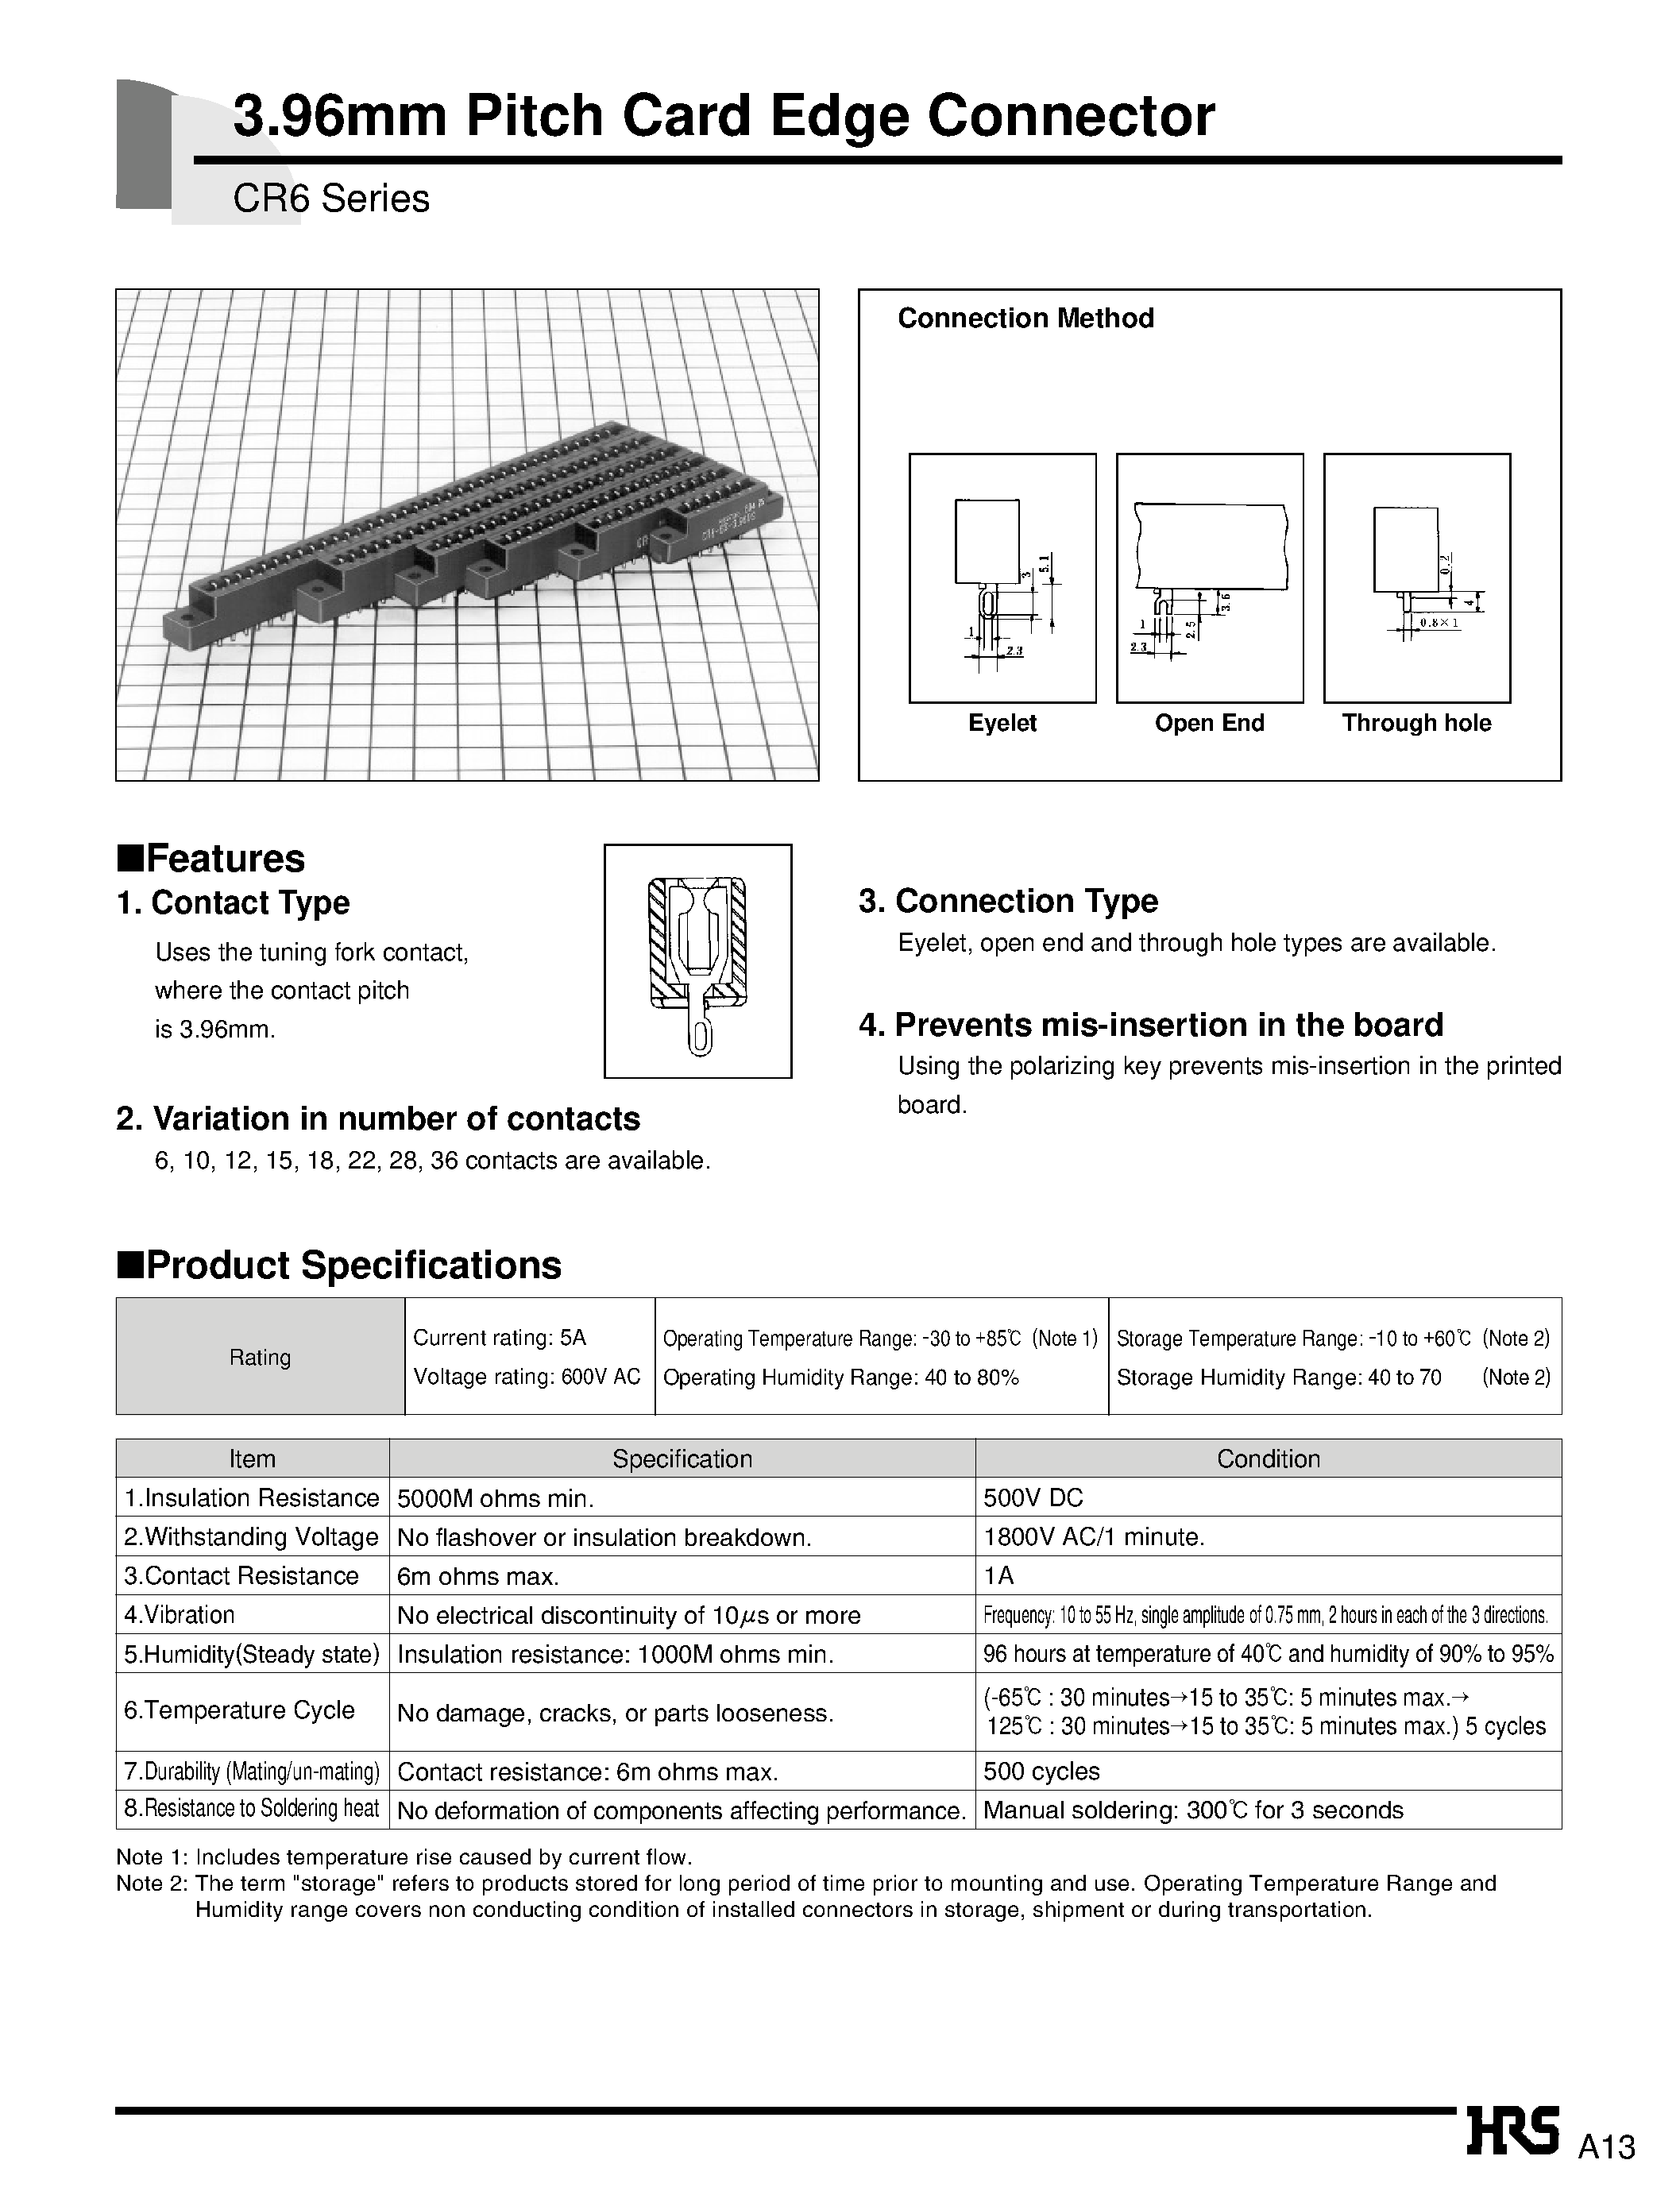 Datasheet CR6-06S-3.96DS - 3.96mm Pitch Card Edge Connector page 1